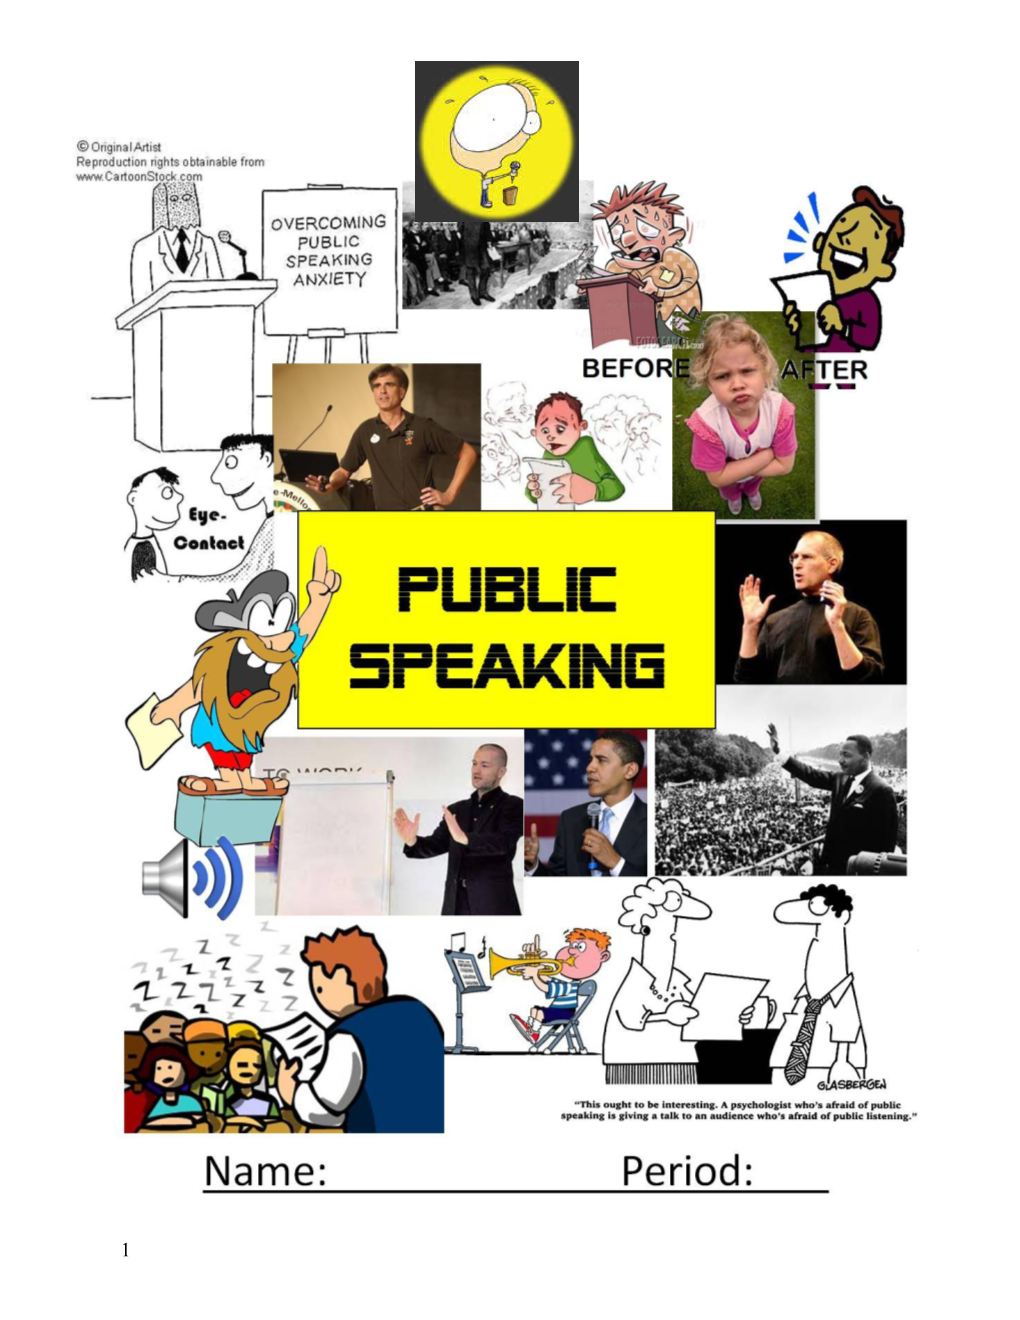 Why Improve Your Public Speaking Skills?